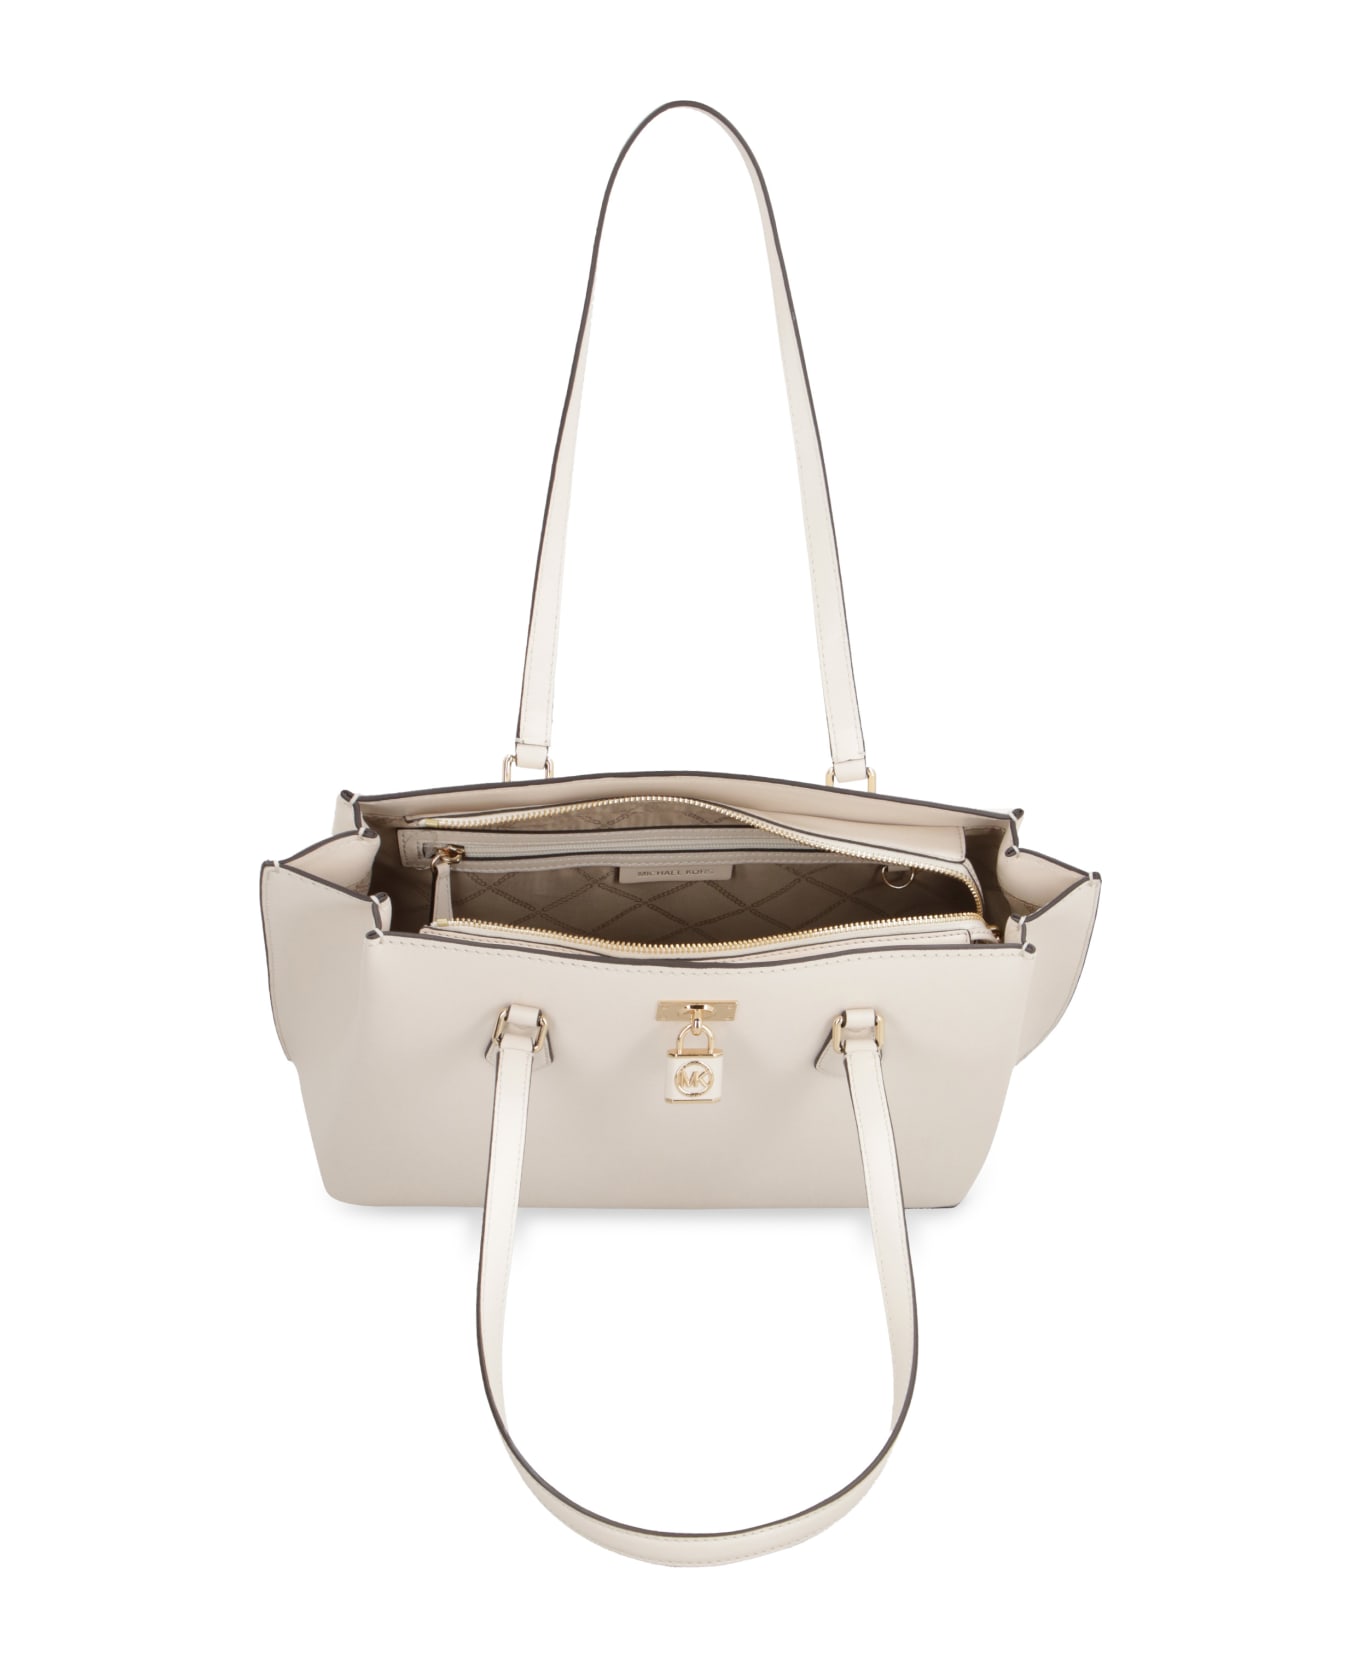 MICHAEL Michael Kors Ruby Leather Tote - Ivory トートバッグ